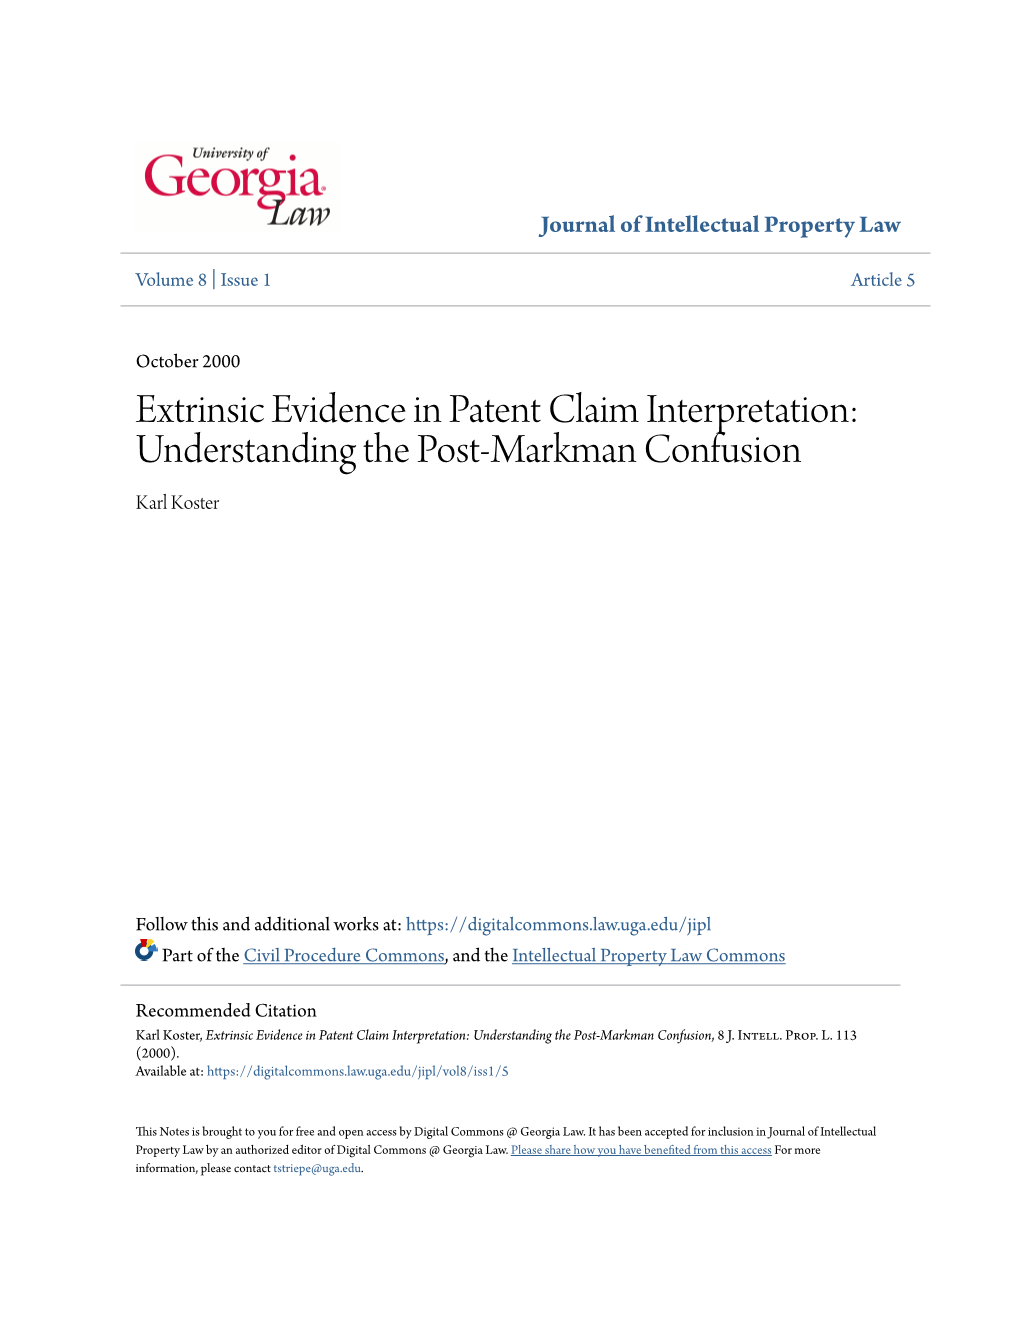 Extrinsic Evidence in Patent Claim Interpretation: Understanding the Post-Markman Confusion Karl Koster